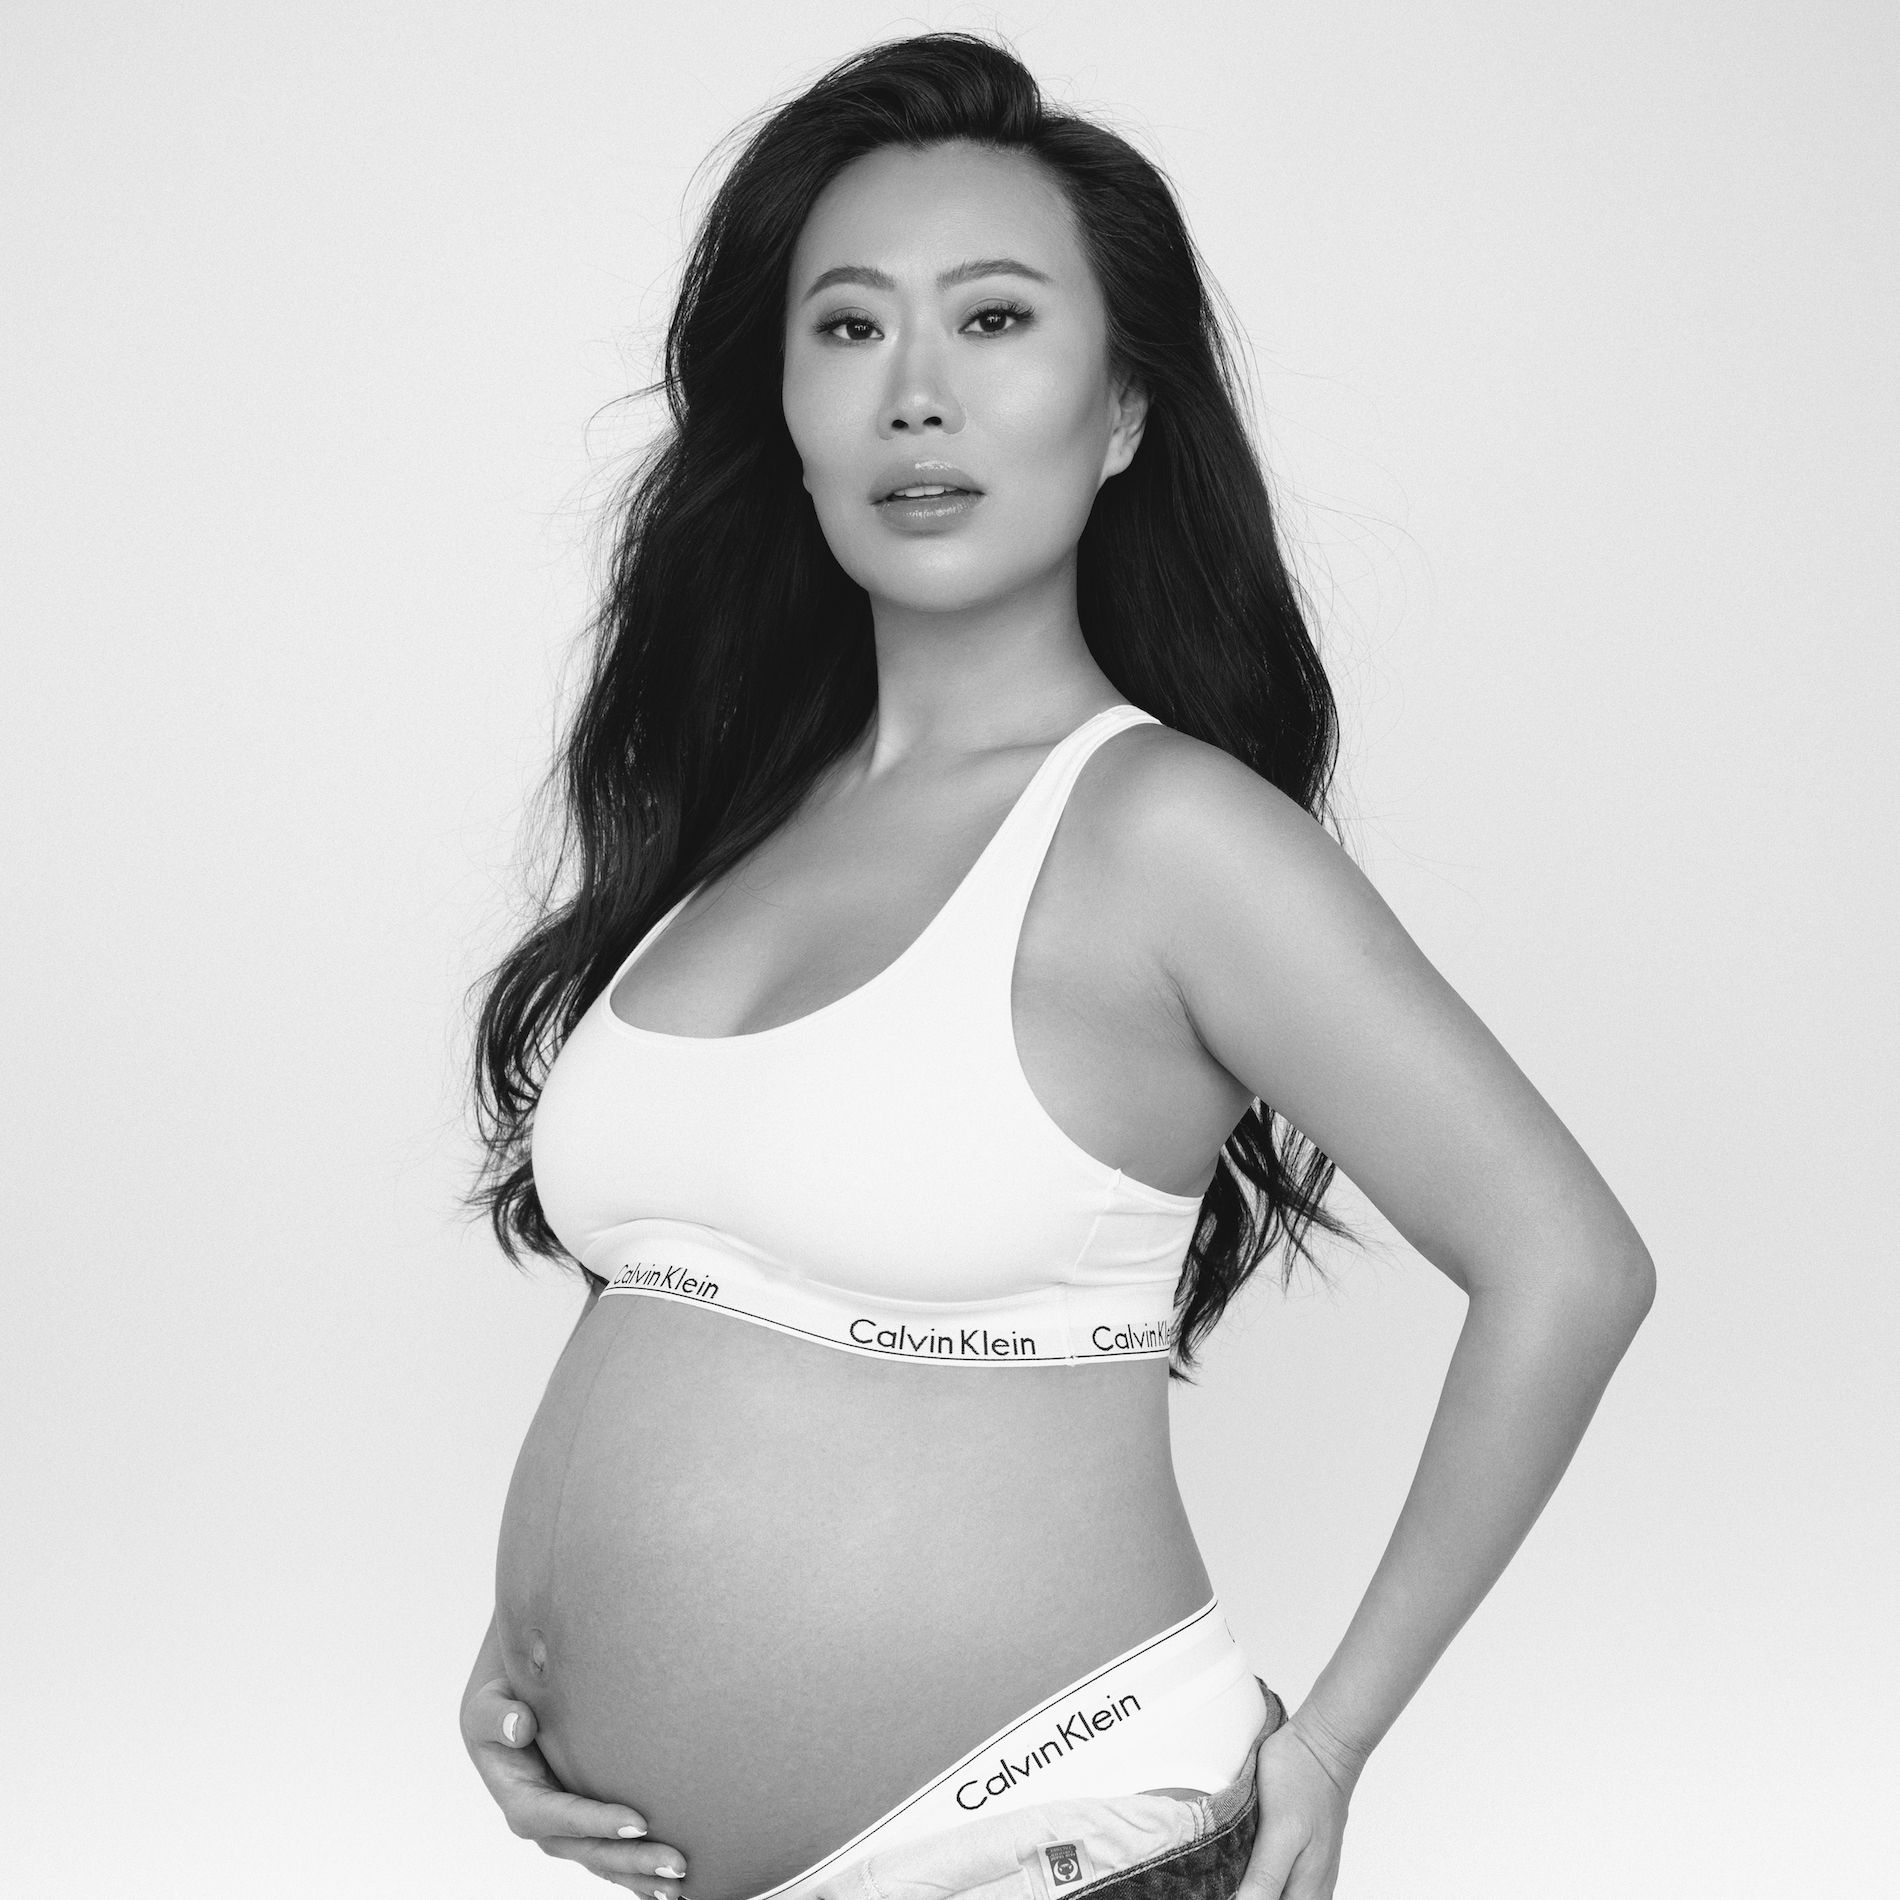 Calvin Klein Maternity Shoot  Maternity photoshoot outfits, Pregnancy  shoot, Maternity dresses for photoshoot